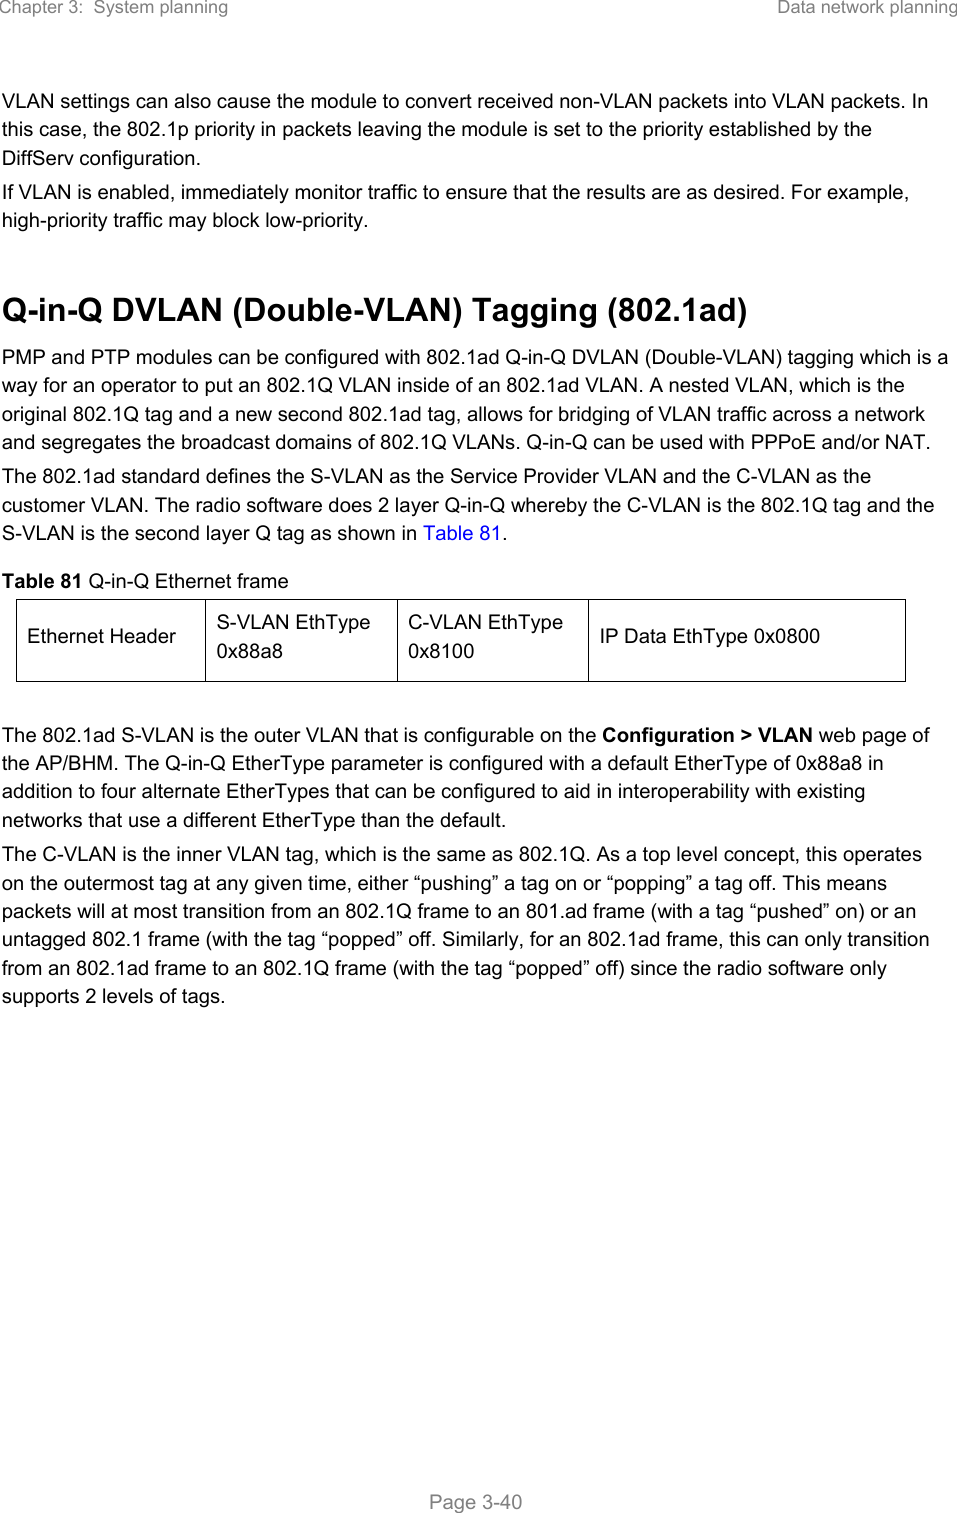 Chapter 3:  System planning  Data network planning   Page 3-40 VLAN settings can also cause the module to convert received non-VLAN packets into VLAN packets. In this case, the 802.1p priority in packets leaving the module is set to the priority established by the DiffServ configuration. If VLAN is enabled, immediately monitor traffic to ensure that the results are as desired. For example, high-priority traffic may block low-priority.  Q-in-Q DVLAN (Double-VLAN) Tagging (802.1ad) PMP and PTP modules can be configured with 802.1ad Q-in-Q DVLAN (Double-VLAN) tagging which is a way for an operator to put an 802.1Q VLAN inside of an 802.1ad VLAN. A nested VLAN, which is the original 802.1Q tag and a new second 802.1ad tag, allows for bridging of VLAN traffic across a network and segregates the broadcast domains of 802.1Q VLANs. Q-in-Q can be used with PPPoE and/or NAT. The 802.1ad standard defines the S-VLAN as the Service Provider VLAN and the C-VLAN as the customer VLAN. The radio software does 2 layer Q-in-Q whereby the C-VLAN is the 802.1Q tag and the S-VLAN is the second layer Q tag as shown in Table 81. Table 81 Q-in-Q Ethernet frame Ethernet Header  S-VLAN EthType 0x88a8 C-VLAN EthType 0x8100  IP Data EthType 0x0800  The 802.1ad S-VLAN is the outer VLAN that is configurable on the Configuration &gt; VLAN web page of the AP/BHM. The Q-in-Q EtherType parameter is configured with a default EtherType of 0x88a8 in addition to four alternate EtherTypes that can be configured to aid in interoperability with existing networks that use a different EtherType than the default. The C-VLAN is the inner VLAN tag, which is the same as 802.1Q. As a top level concept, this operates on the outermost tag at any given time, either “pushing” a tag on or “popping” a tag off. This means packets will at most transition from an 802.1Q frame to an 801.ad frame (with a tag “pushed” on) or an untagged 802.1 frame (with the tag “popped” off. Similarly, for an 802.1ad frame, this can only transition from an 802.1ad frame to an 802.1Q frame (with the tag “popped” off) since the radio software only supports 2 levels of tags. 